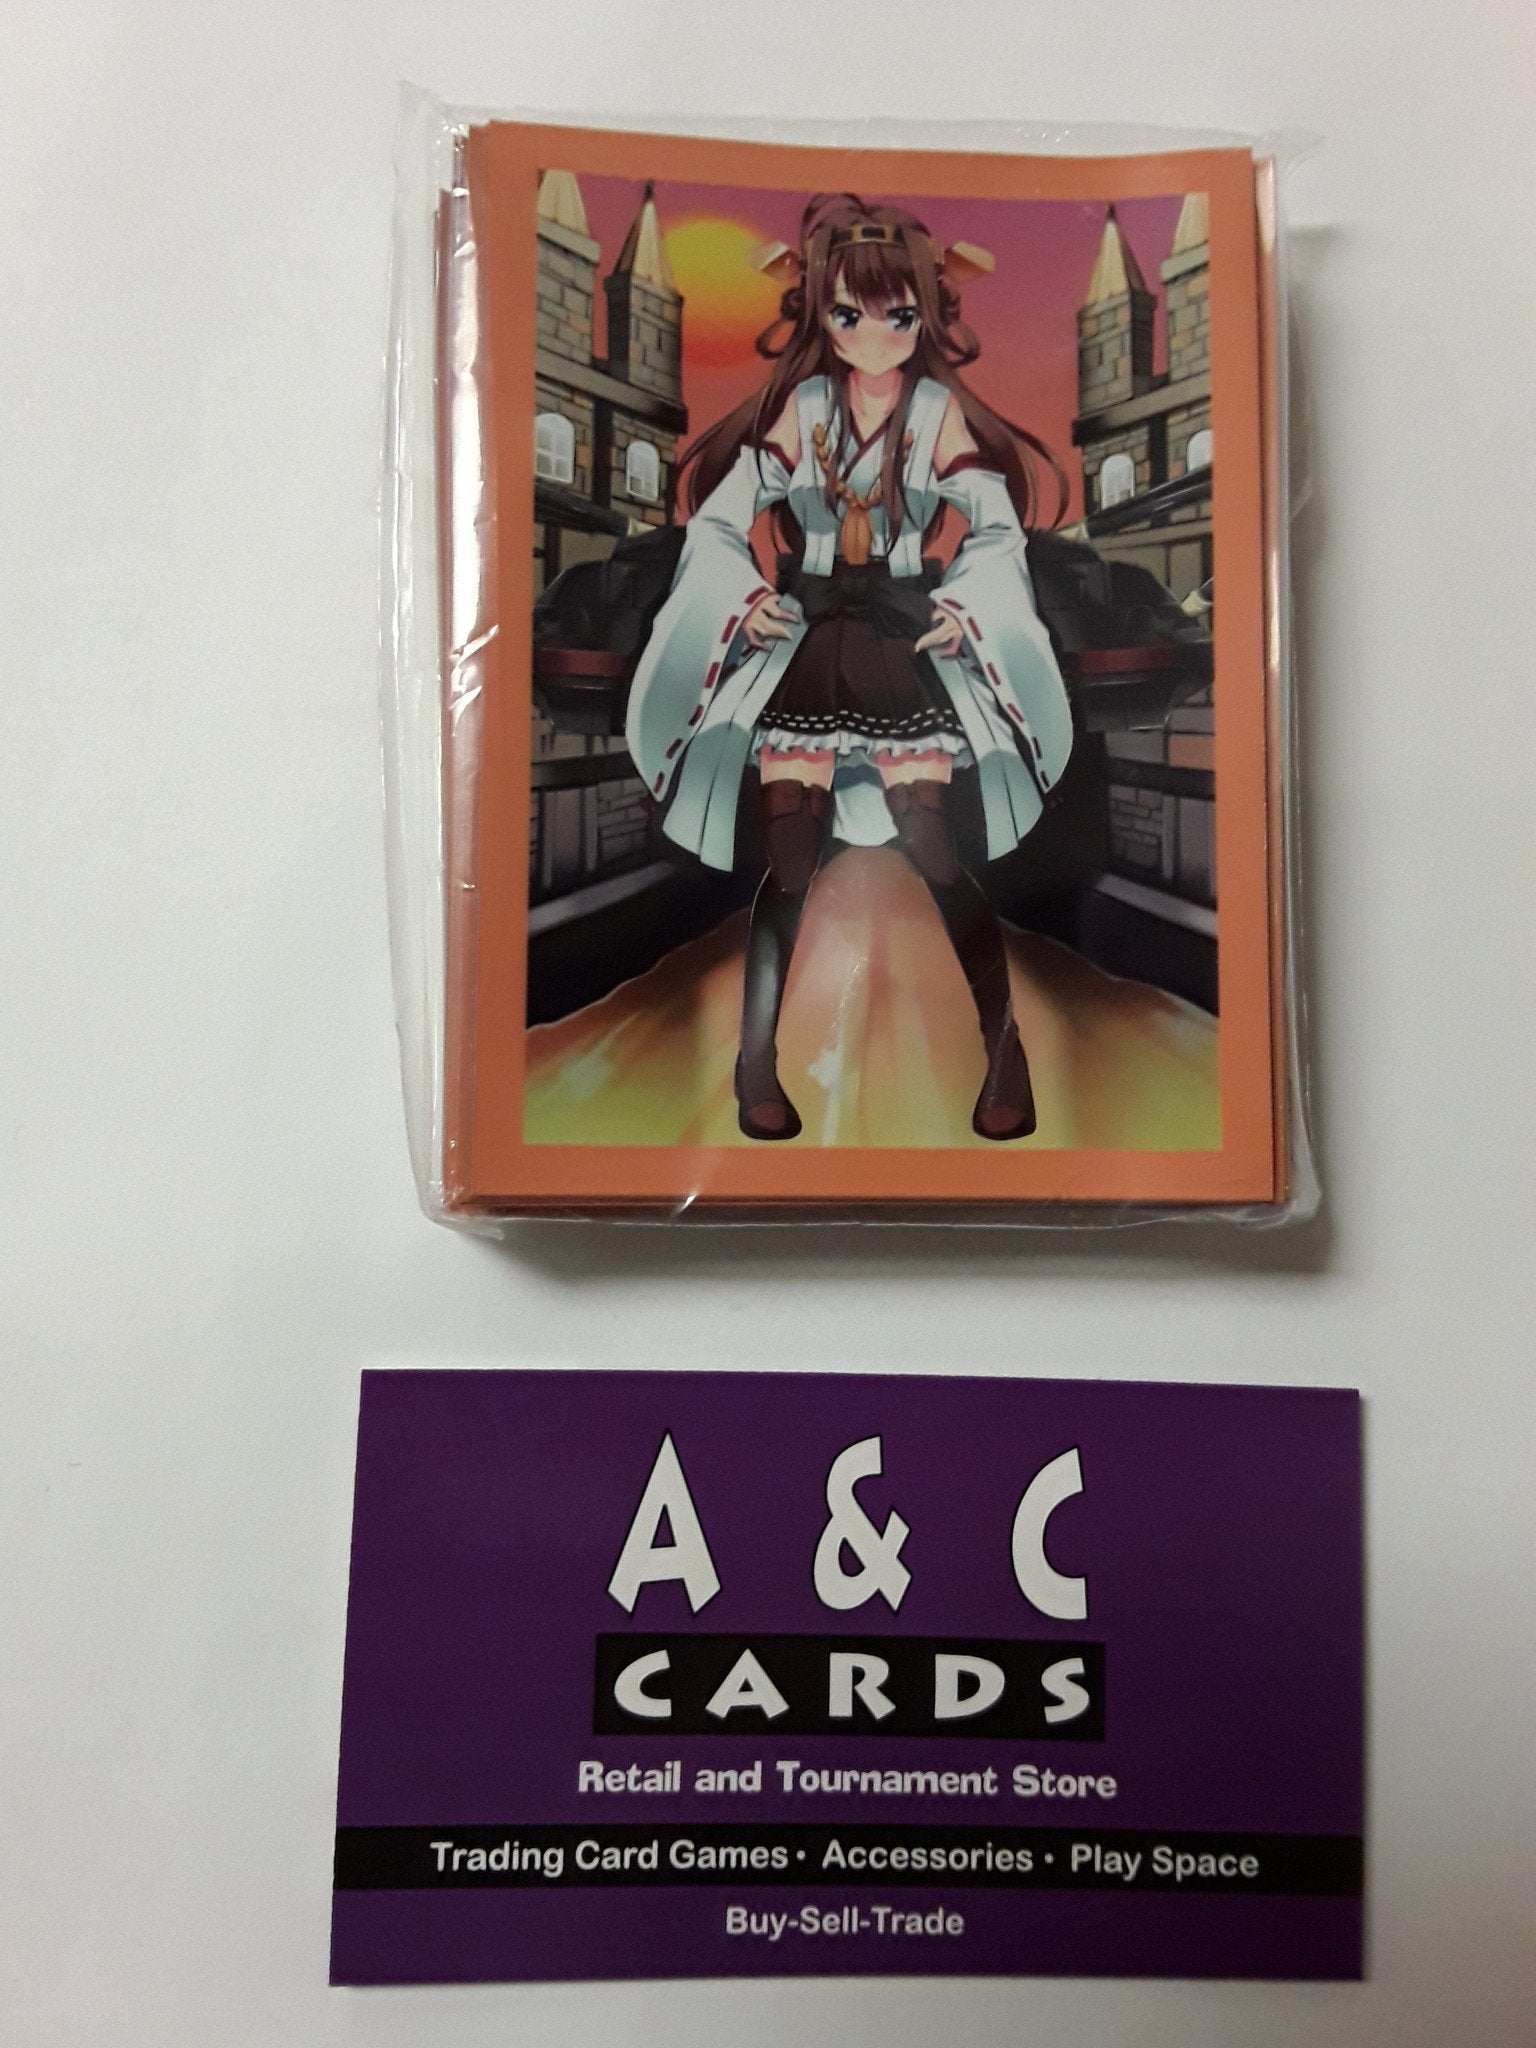 Character Sleeves "Kongo" #3 - 1 pack of Standard Size Sleeves - Kantai Collection